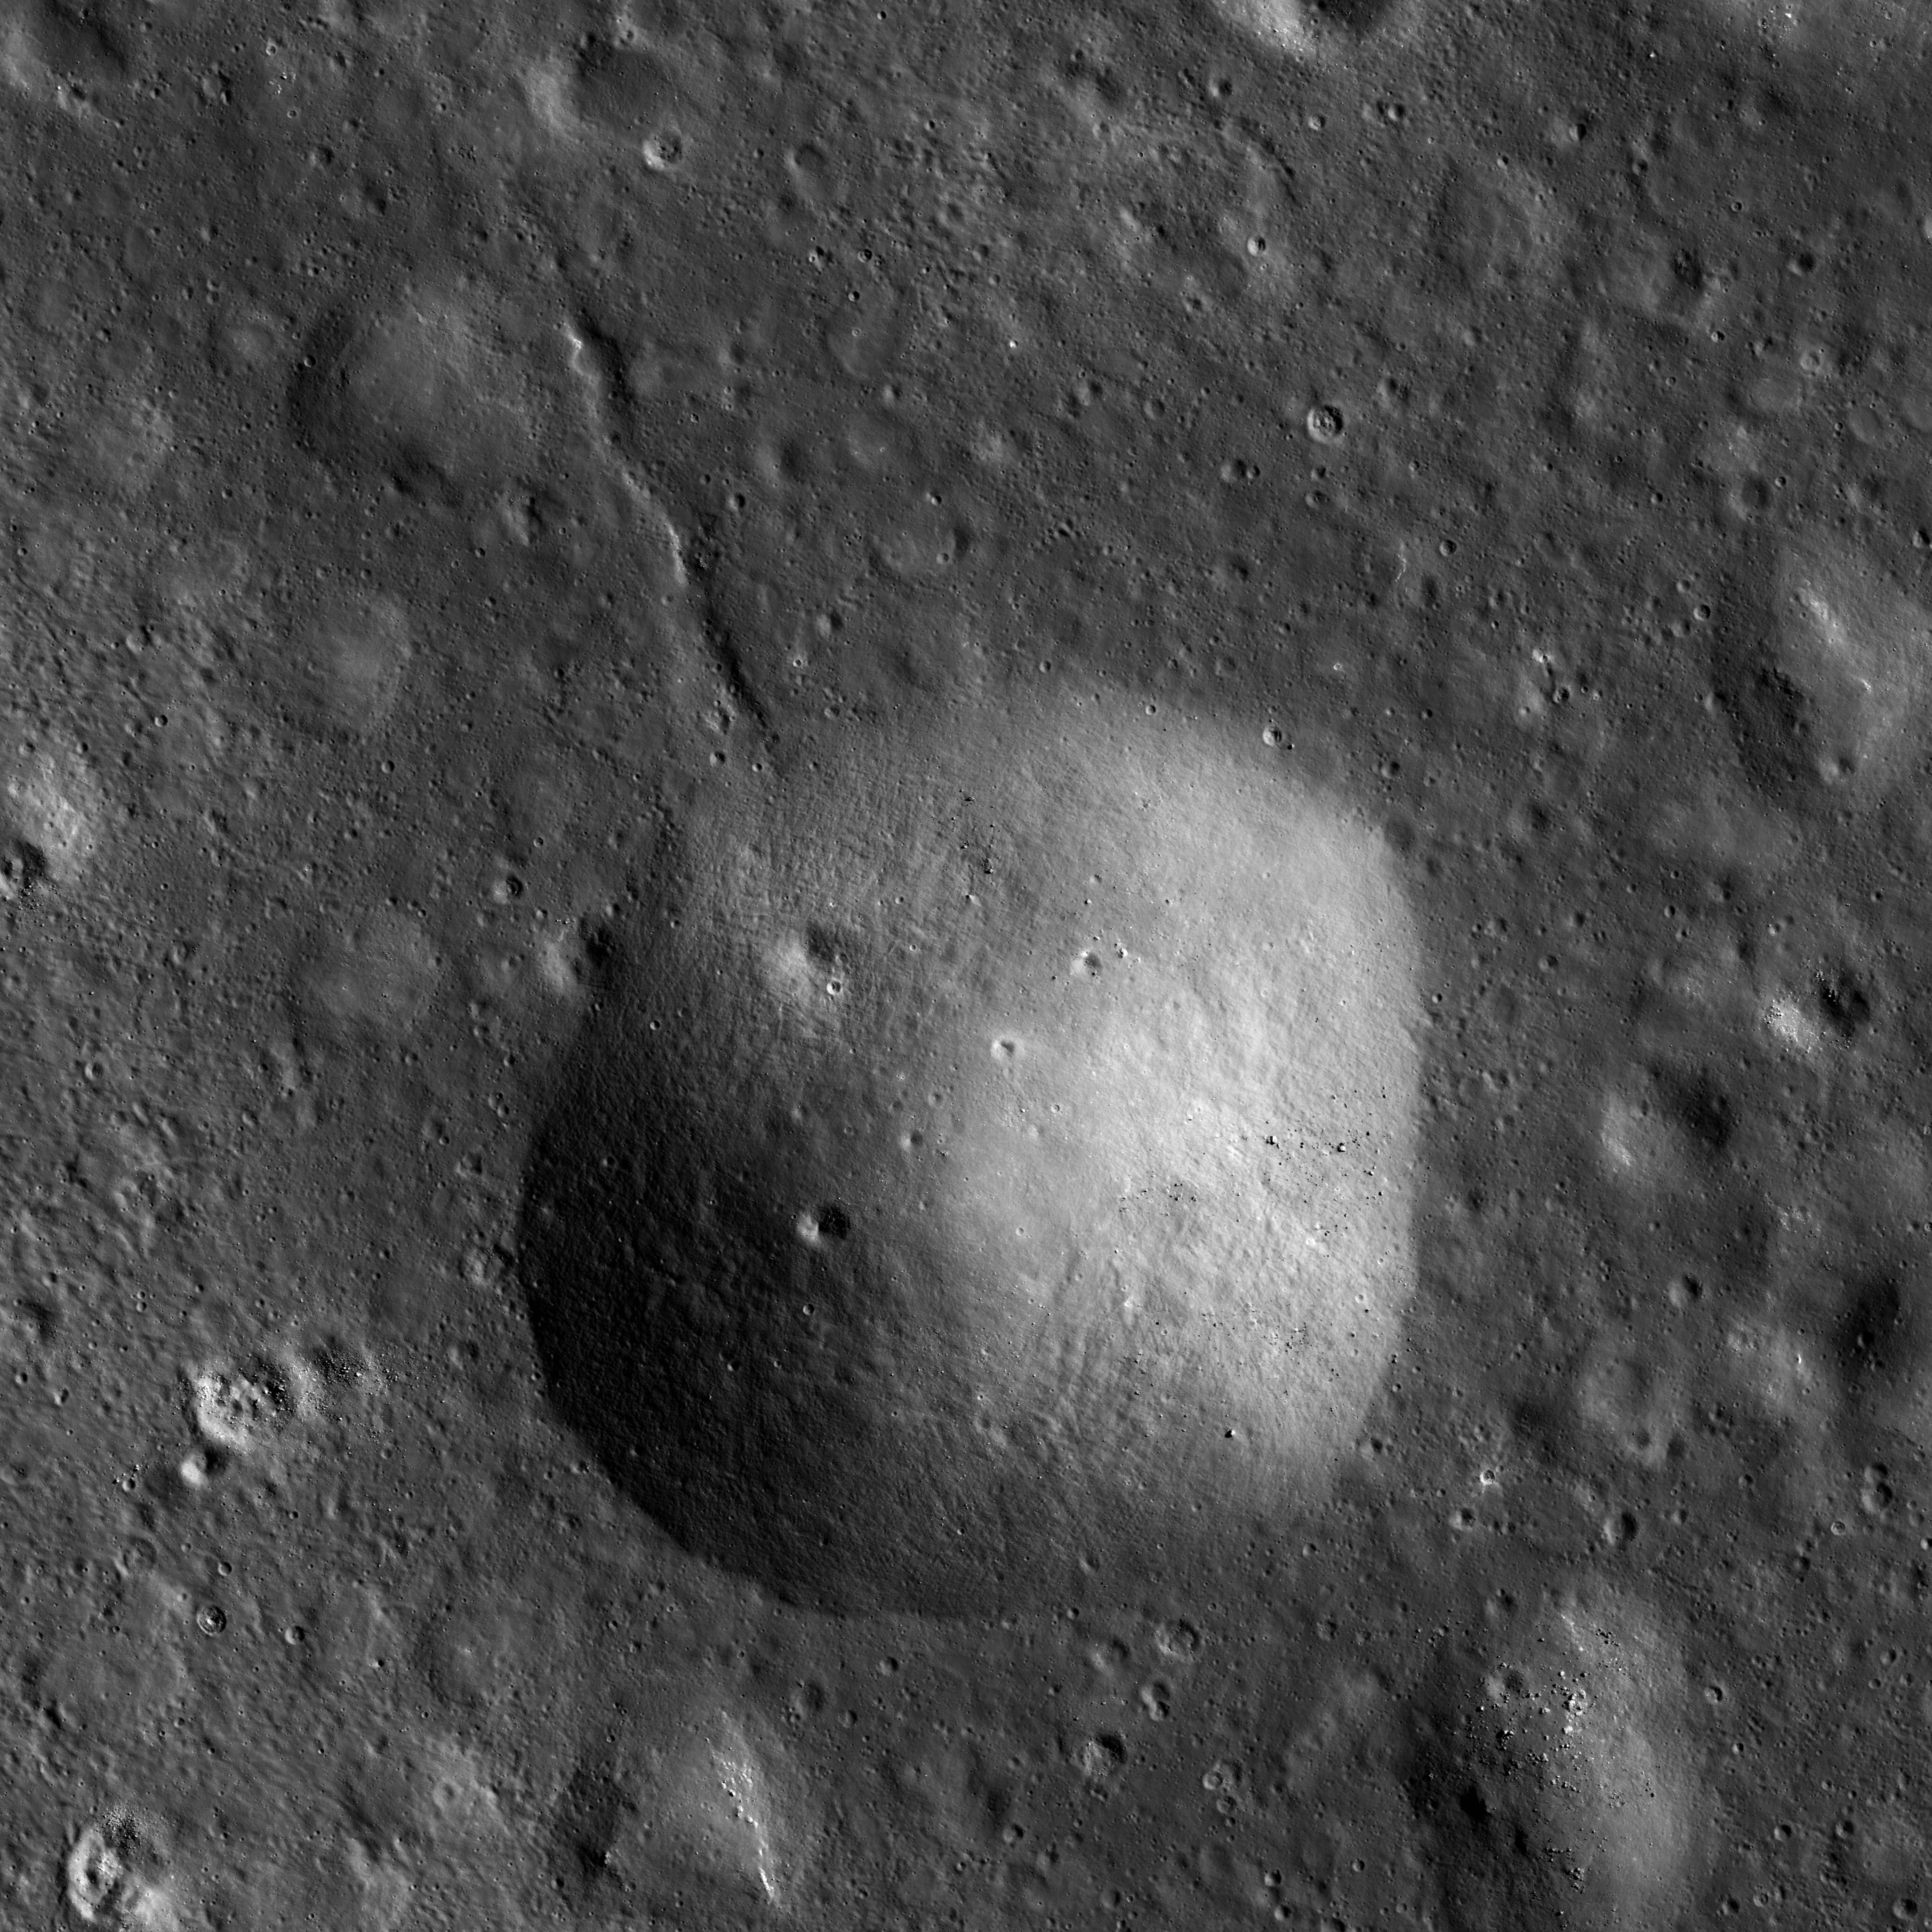 The Domes of Stevinus Crater